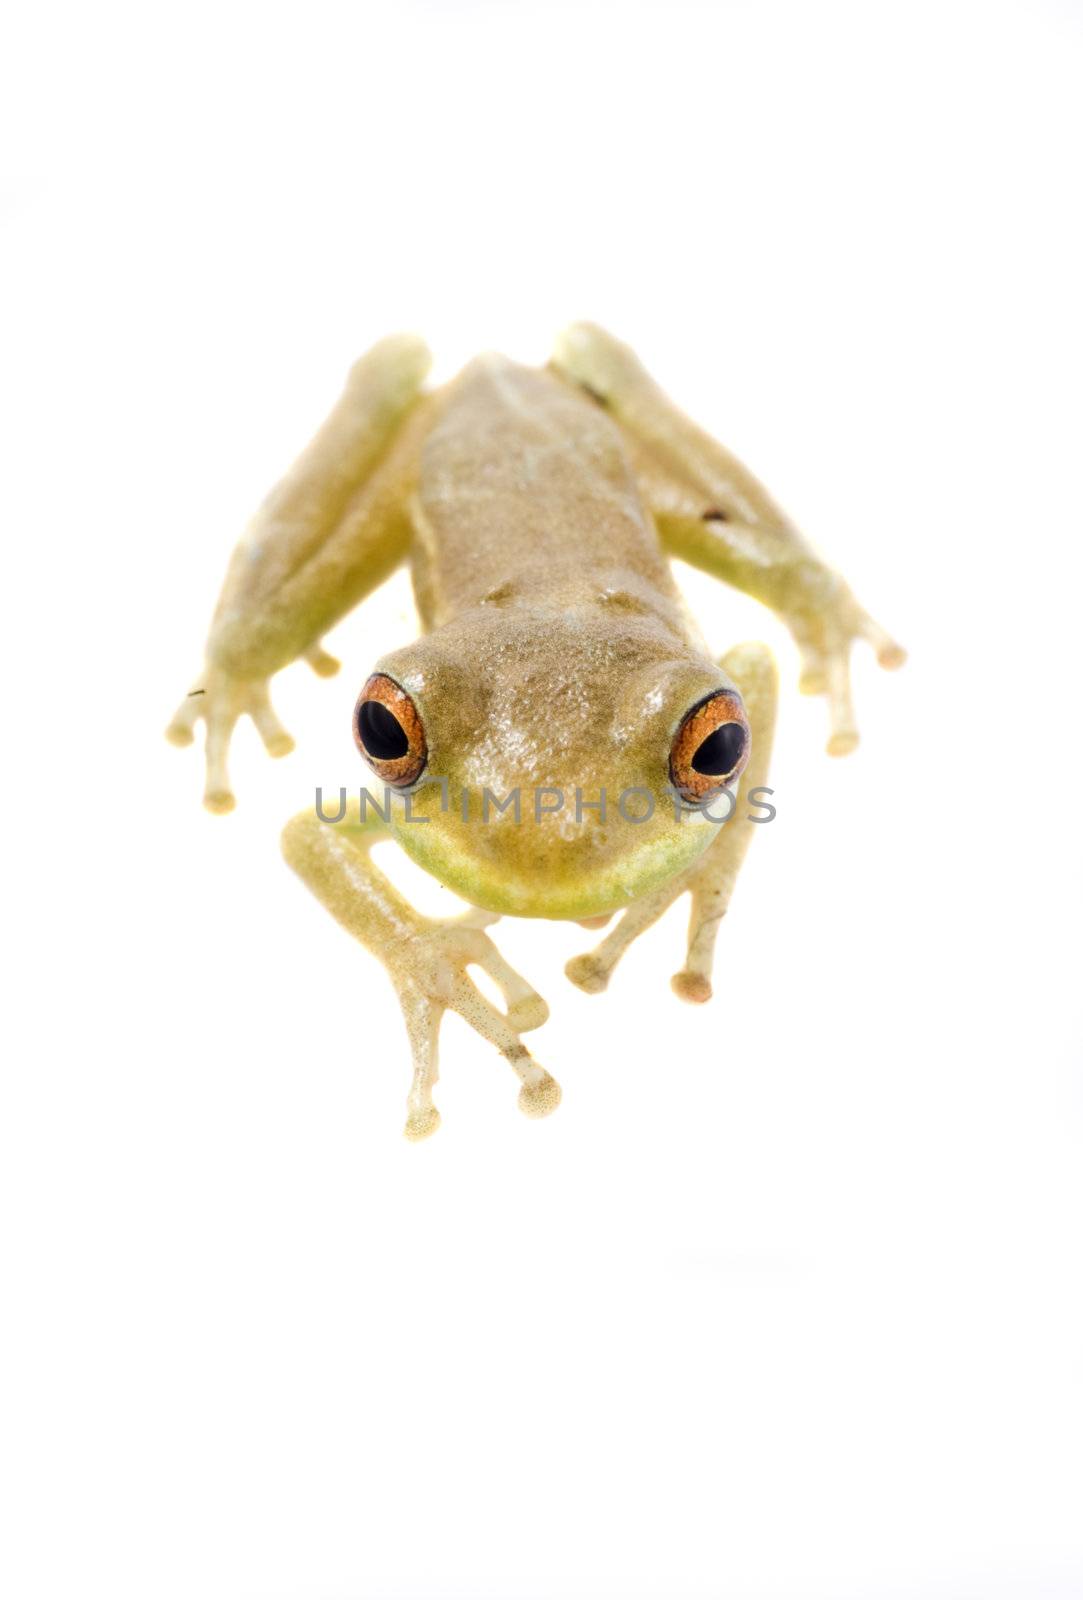 Baby tree frog isolated on a white background in studio